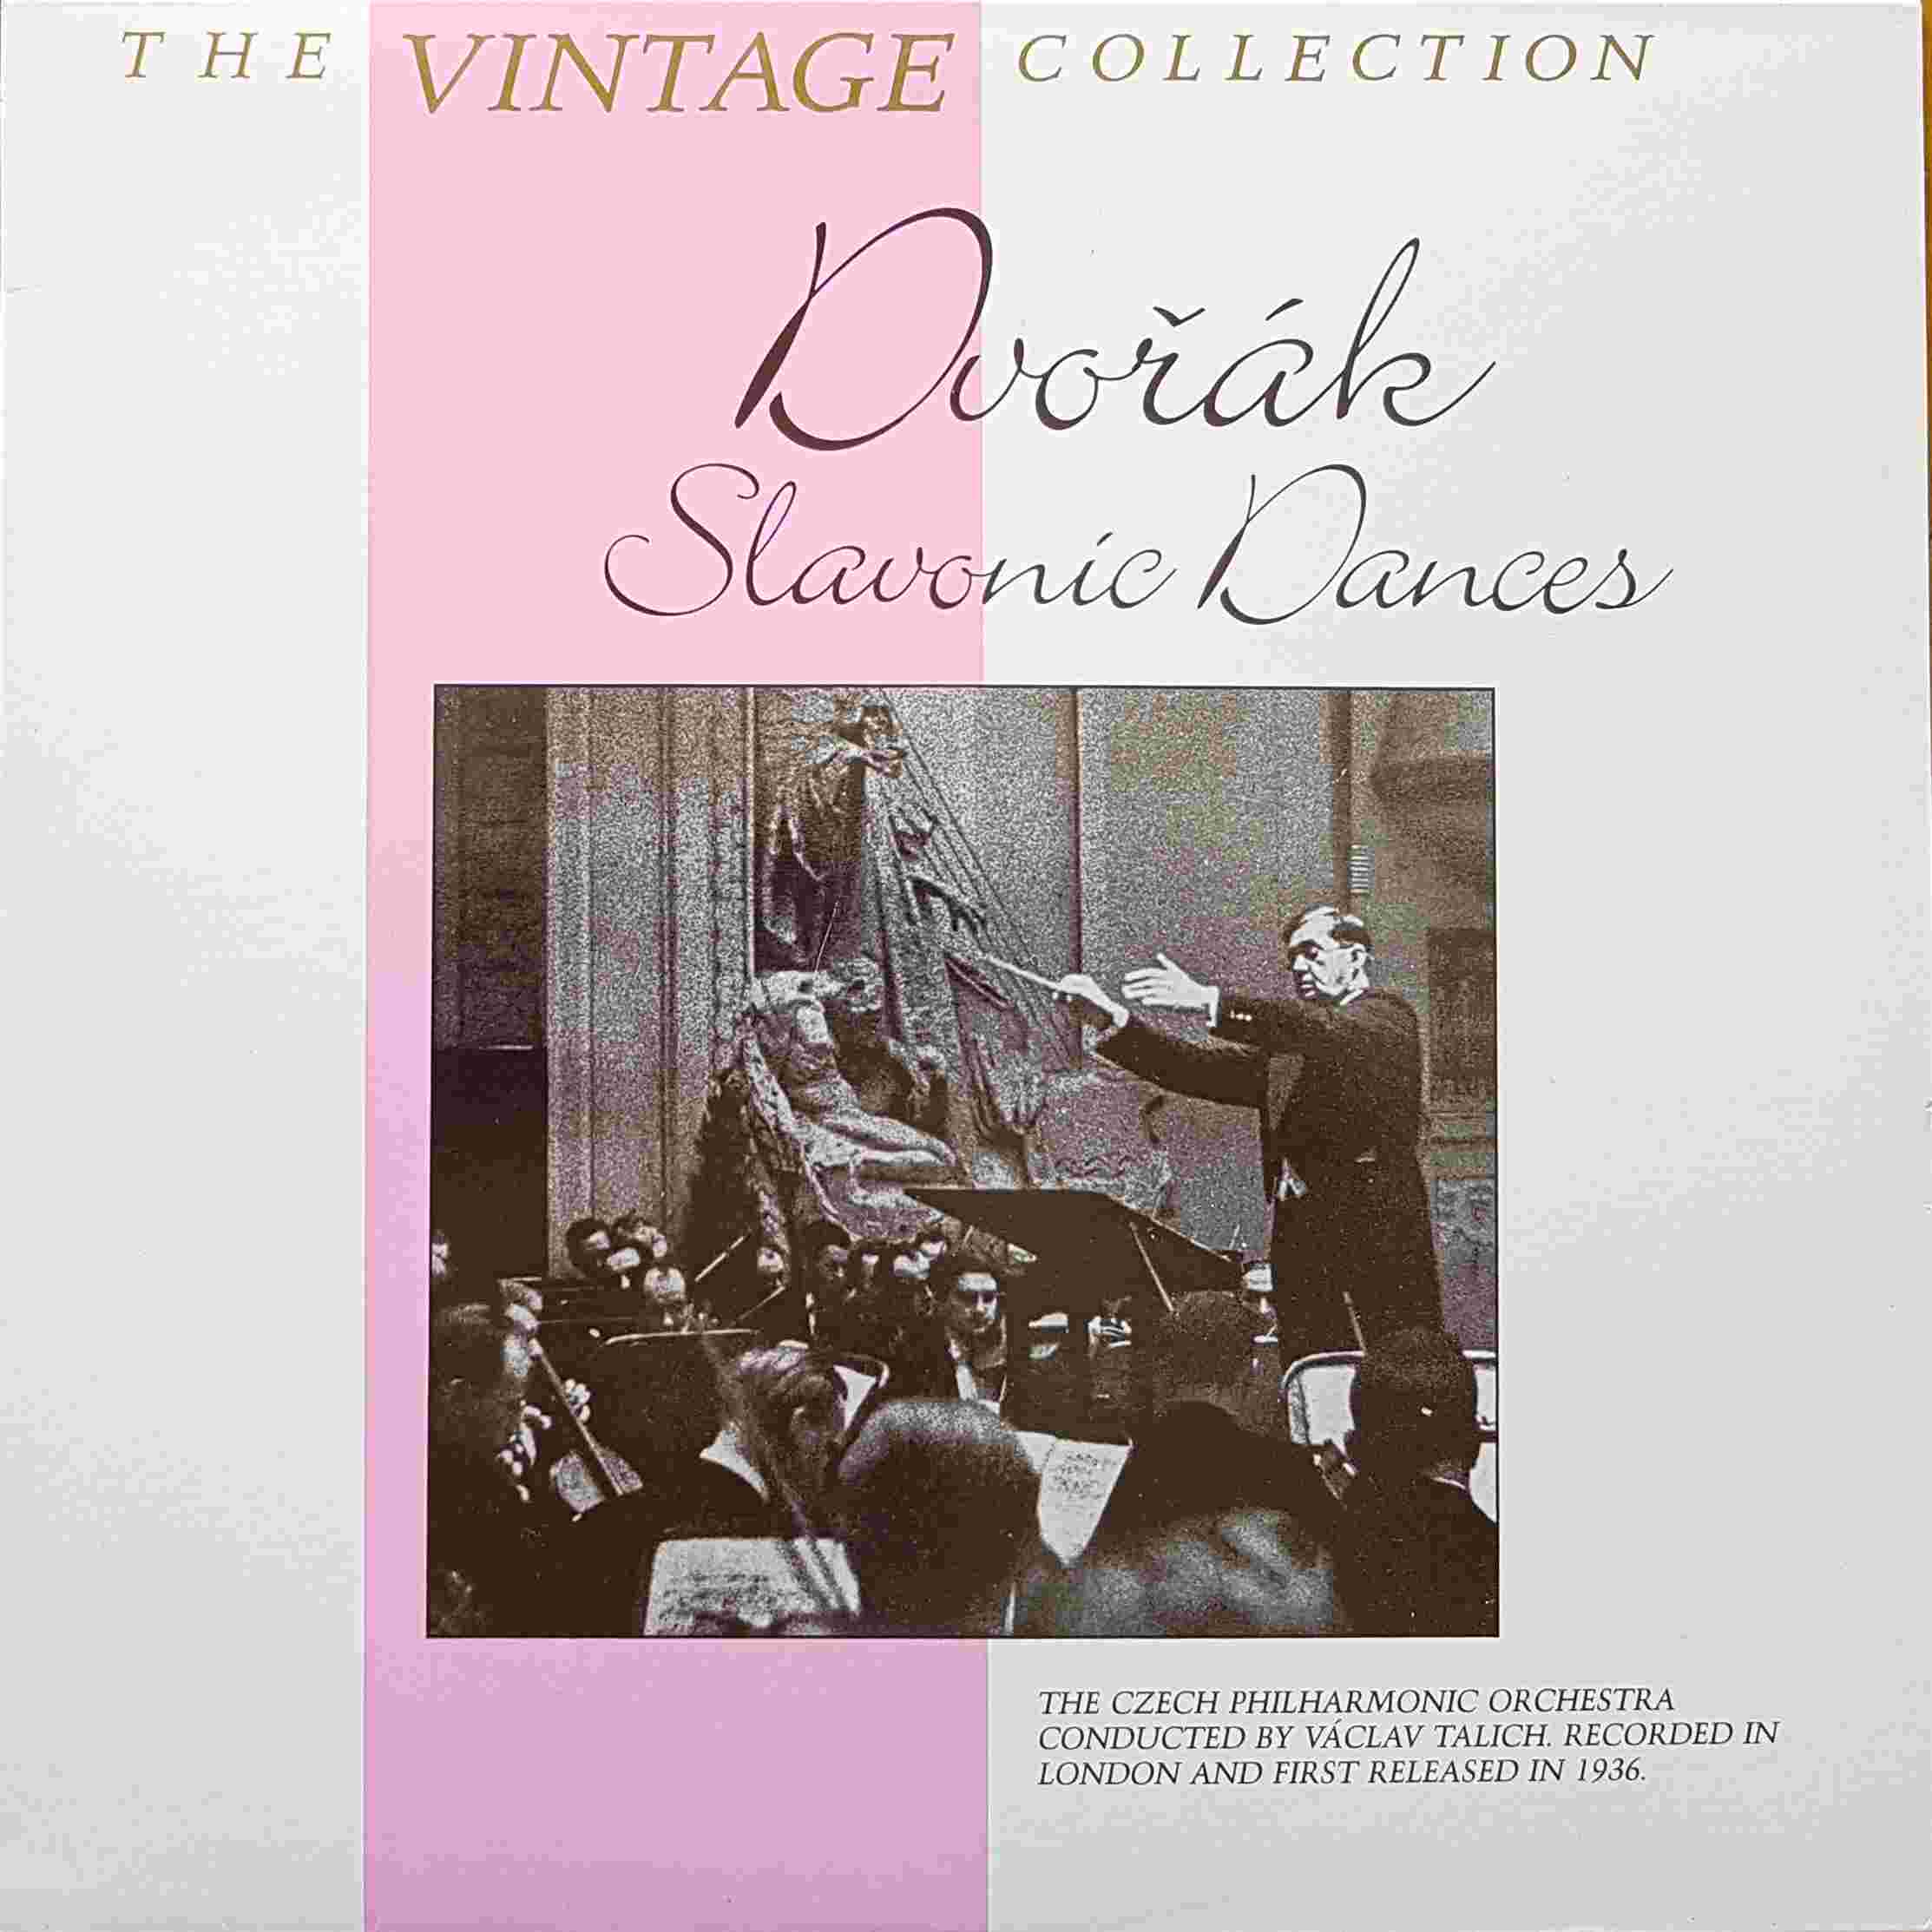 Picture of REH 731 The vintage collection - Dvorak Slavonic dances by artist Dvorak Slavonic  from the BBC albums - Records and Tapes library